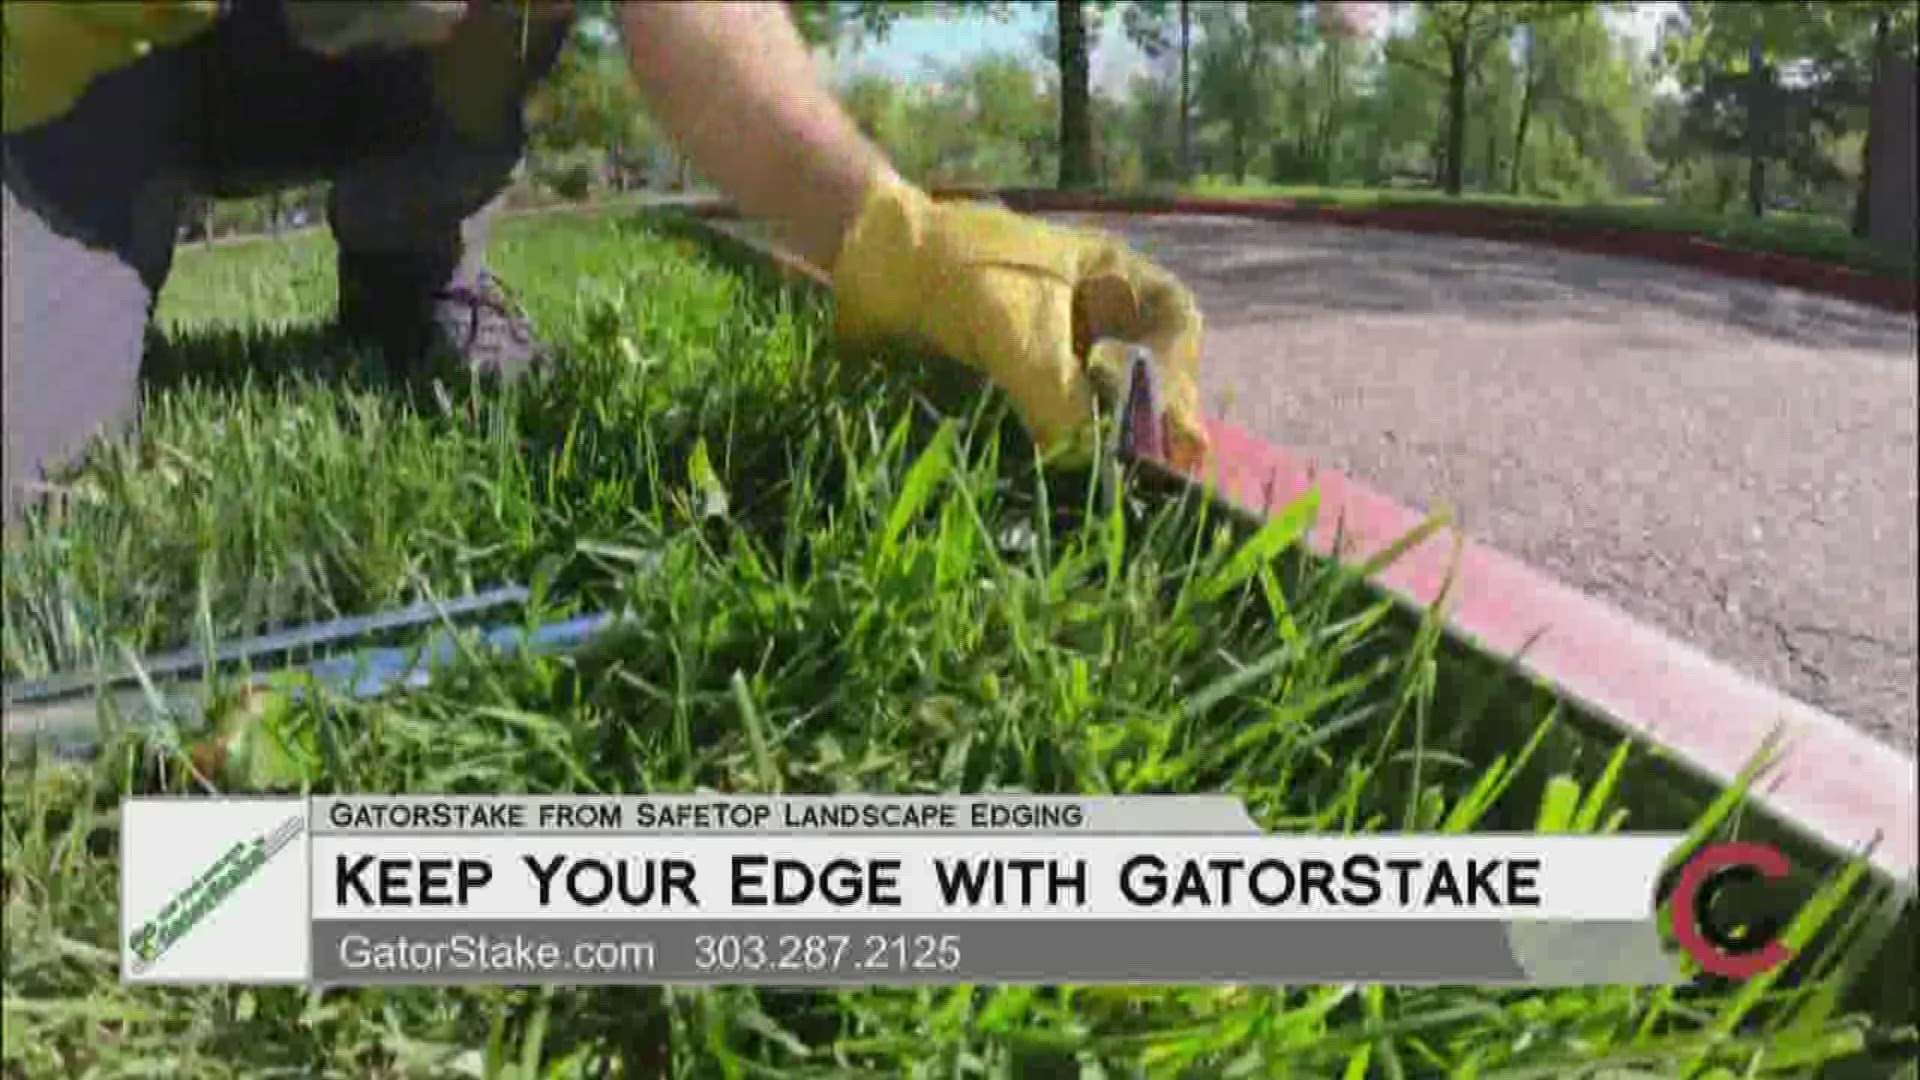 Give Sean and Taylor a call to help maintain your lawn’s edge! Call 303.287.2125 for a full list of retailers. Learn more about GatorStake at www.GatorStake.com. 
THIS INTERVIEW HAS COMMERCIAL CONTENT. PRODUCTS AND SERVICES FEATURED APPEAR AS PAID ADVERTISING.